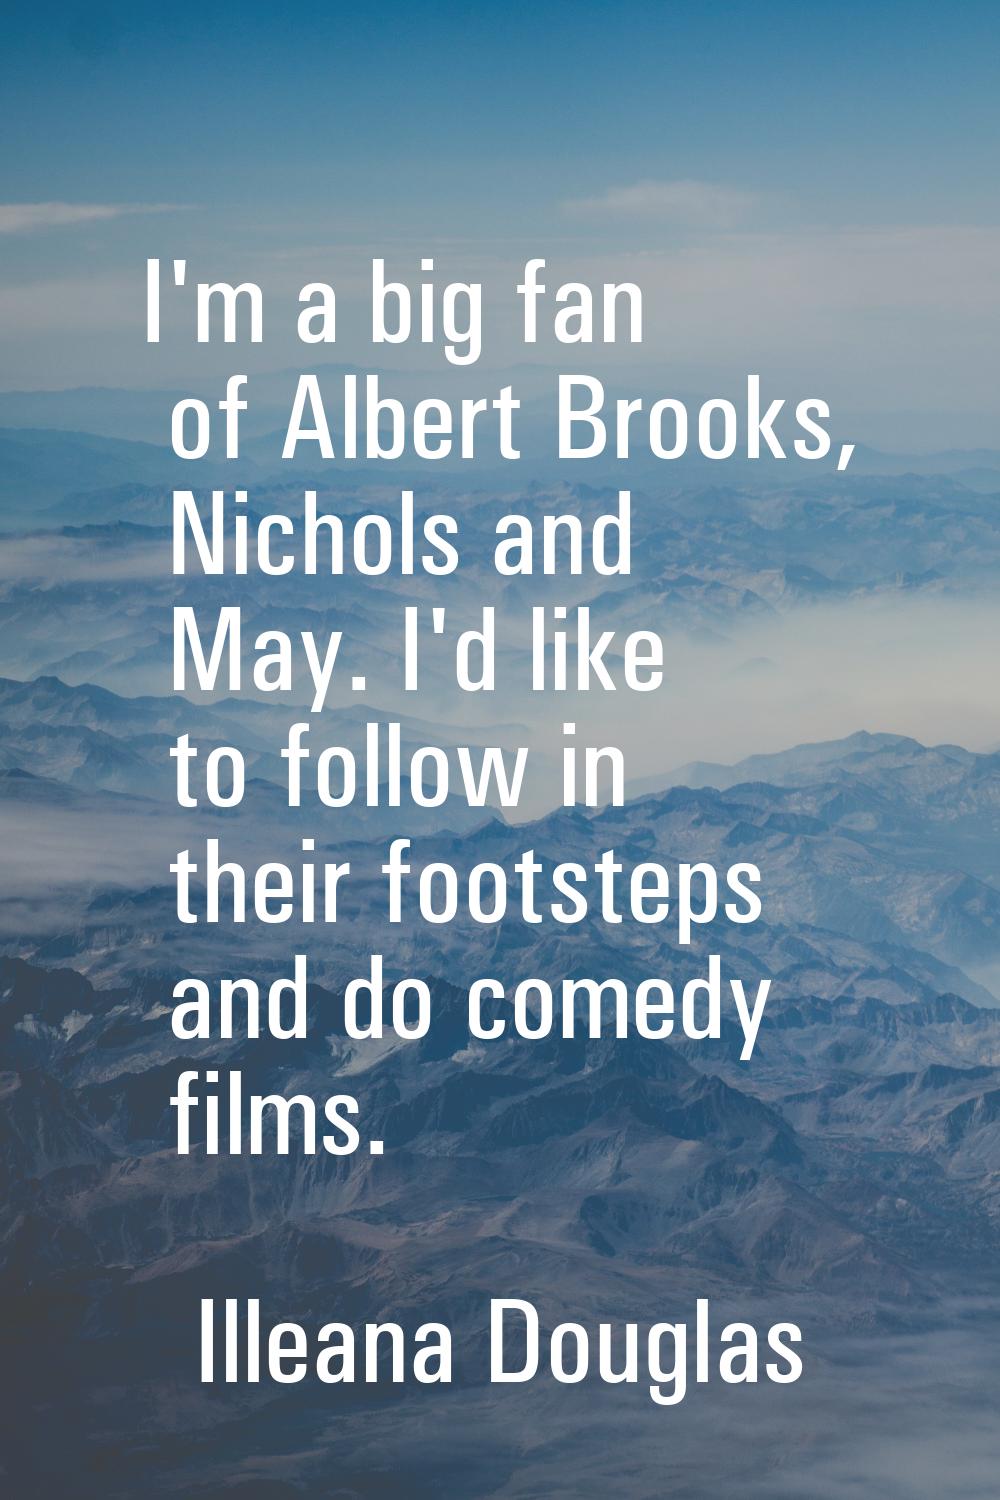 I'm a big fan of Albert Brooks, Nichols and May. I'd like to follow in their footsteps and do comed